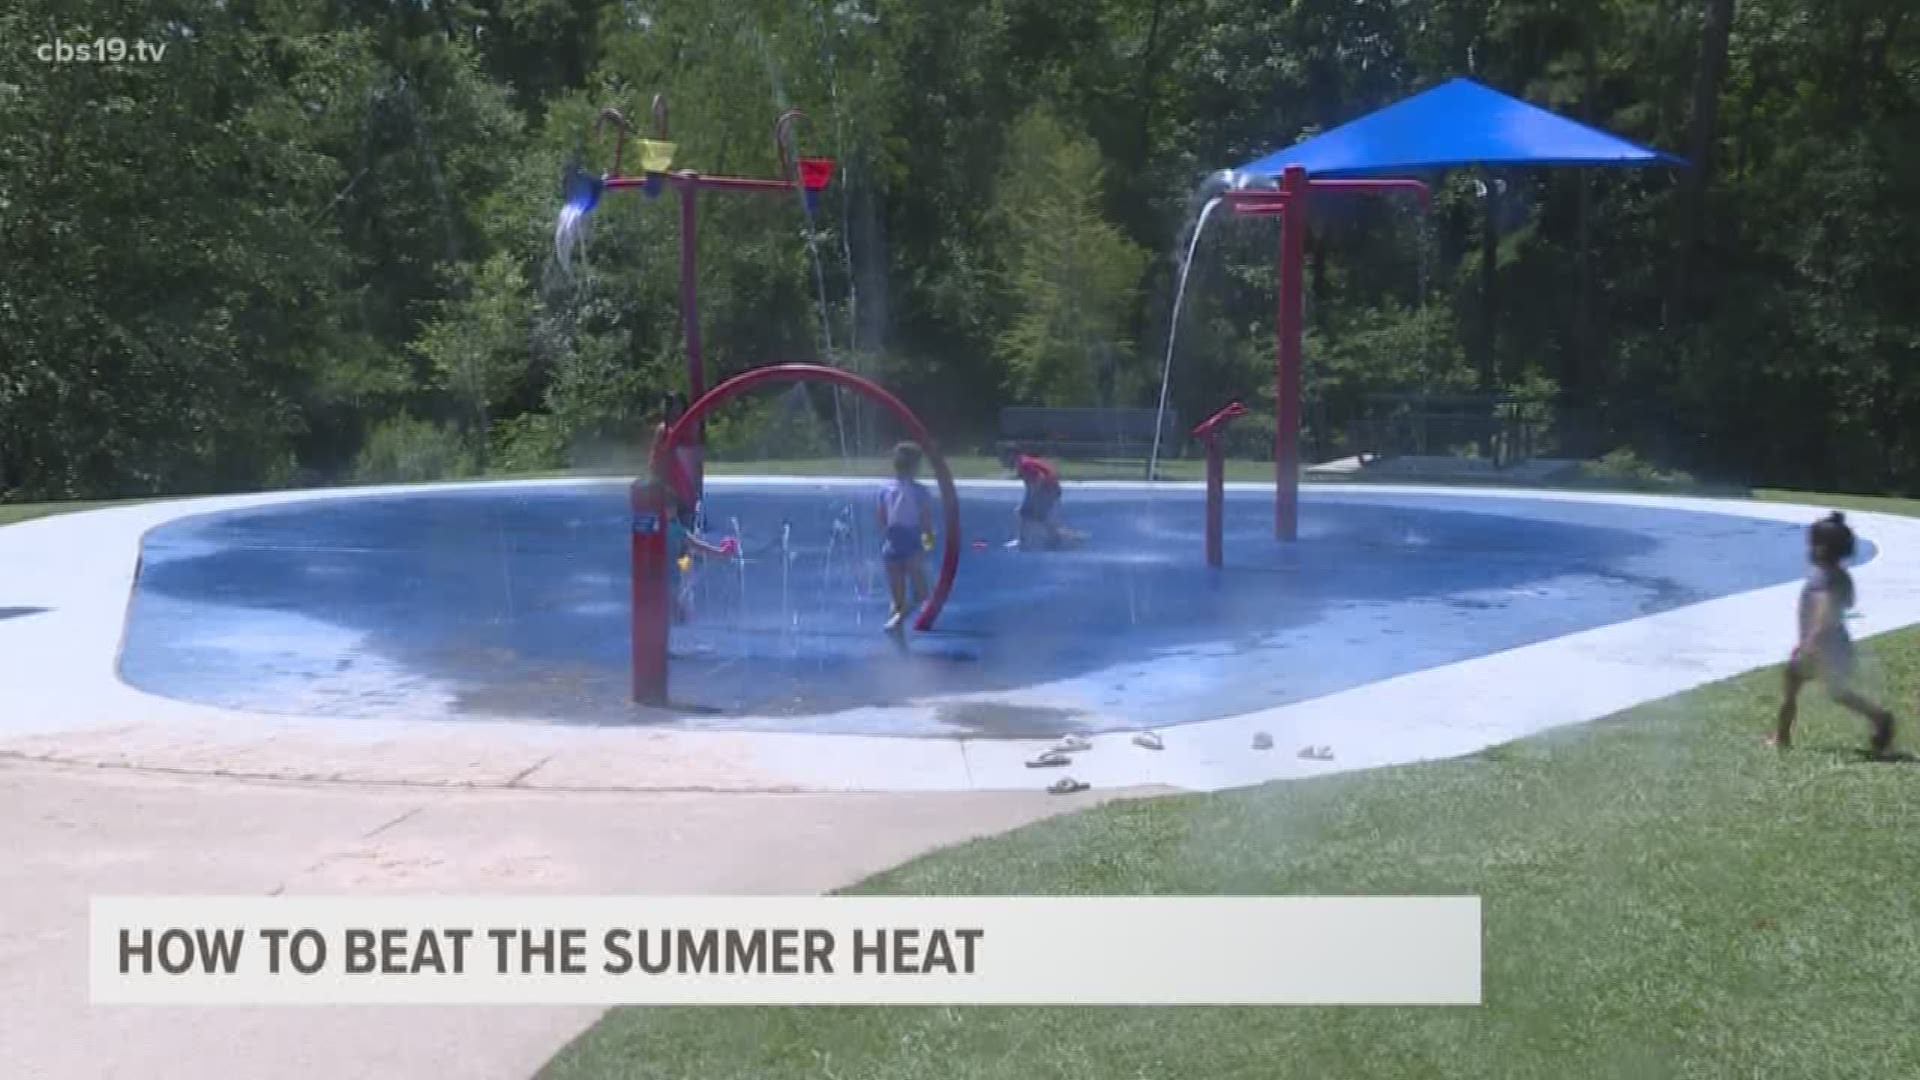 As the temperature gets warmer, here are some ways to stay cool.